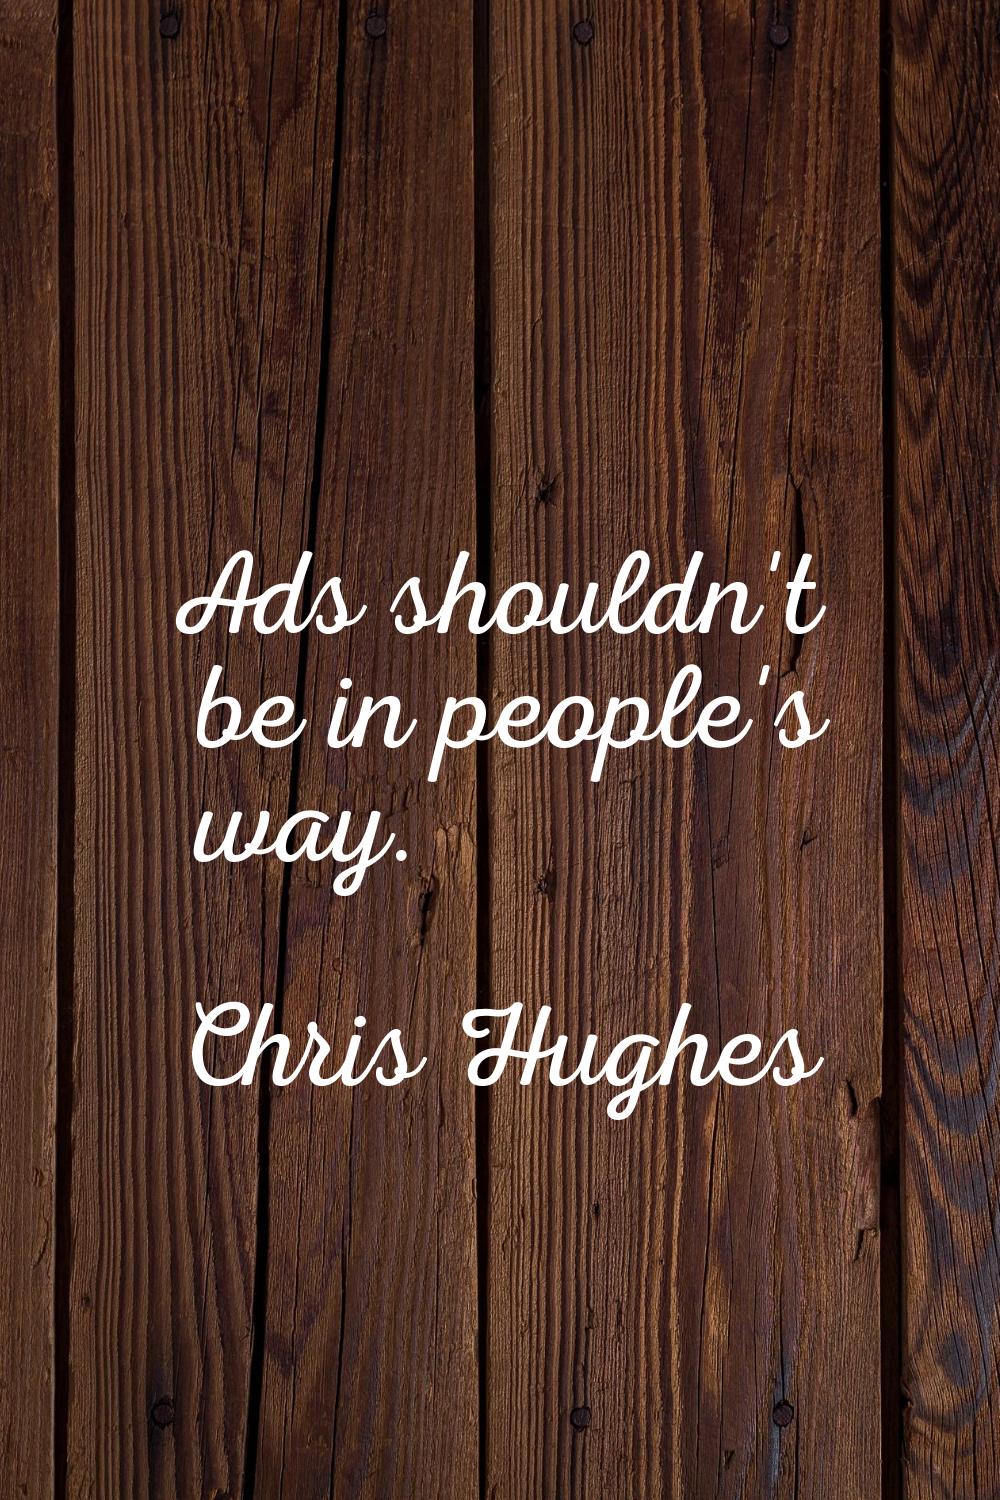 Ads shouldn't be in people's way.